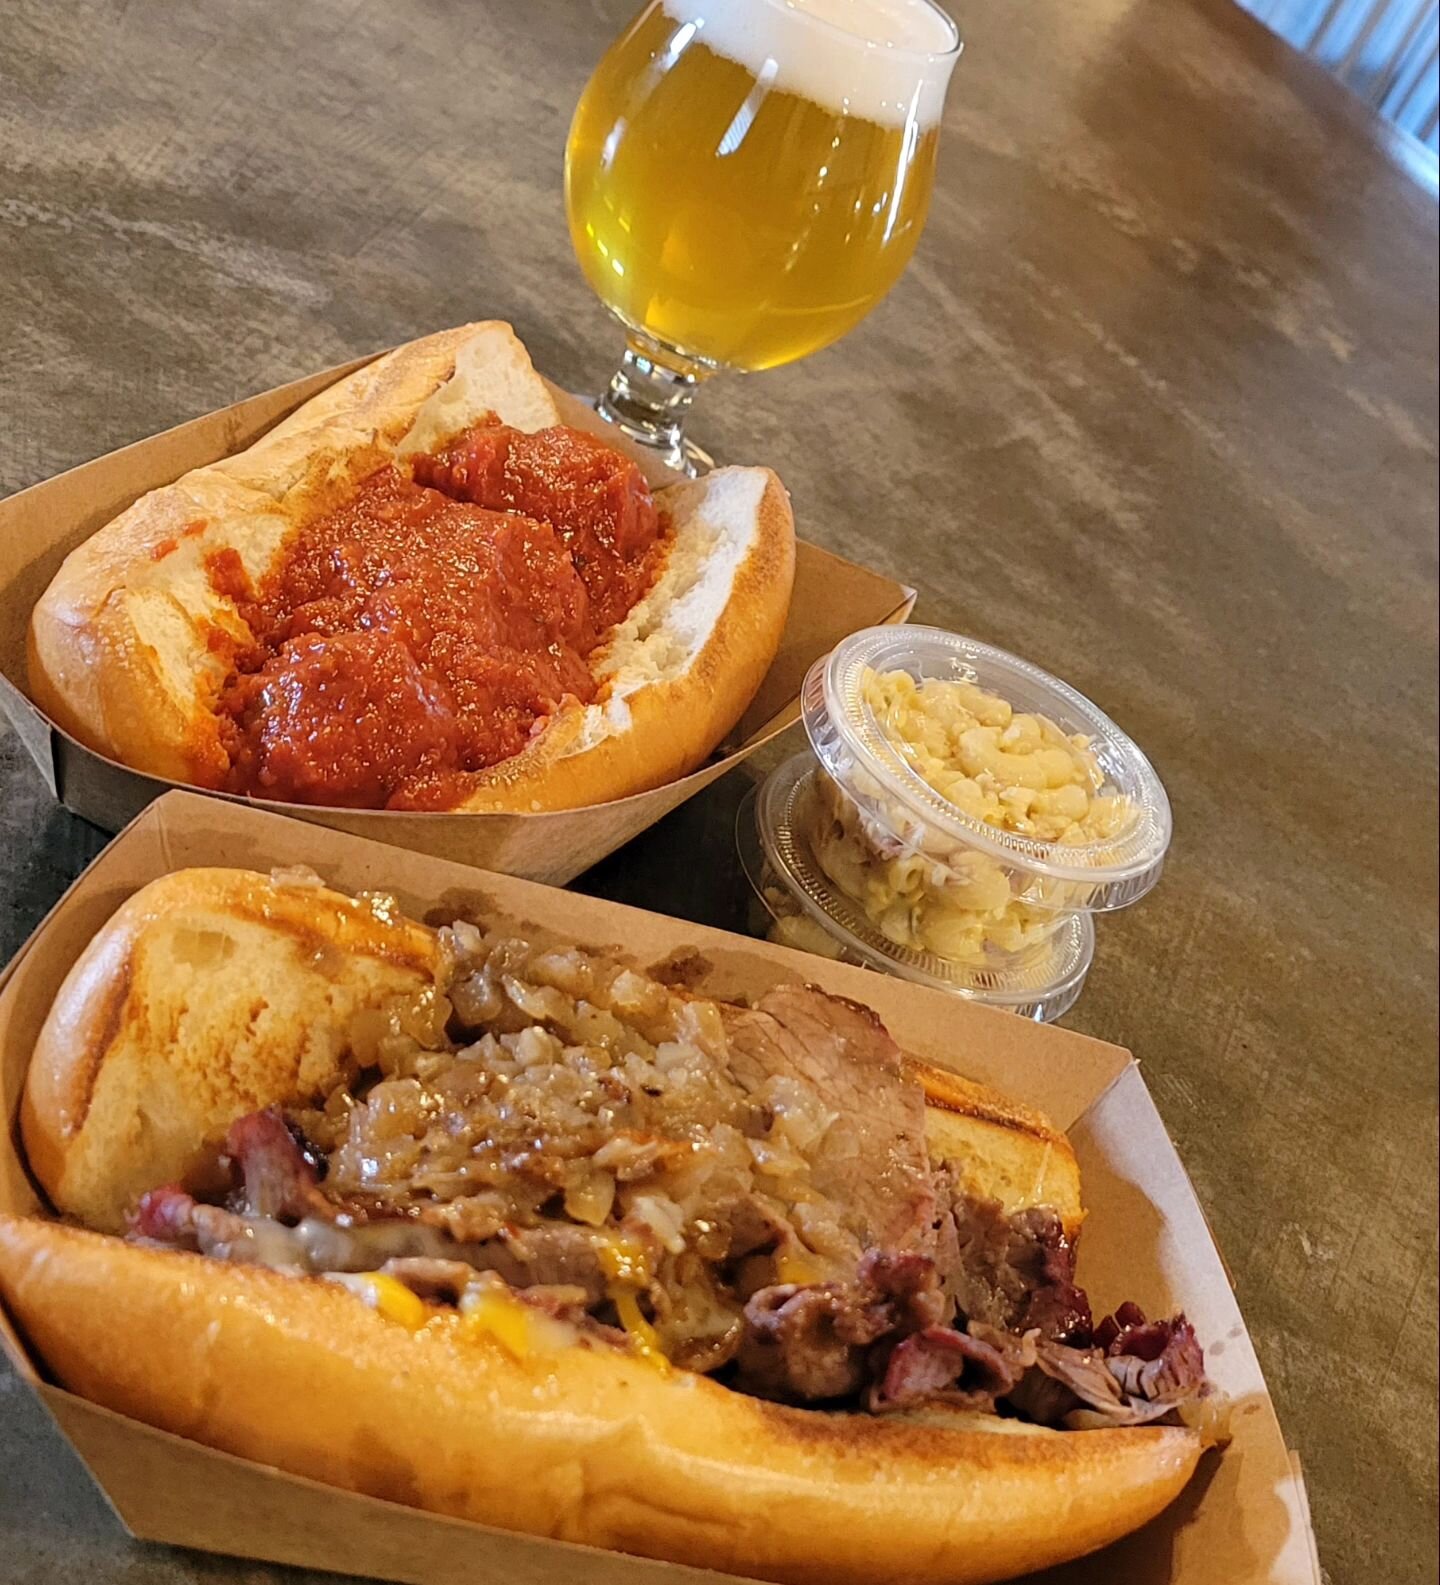 Beer, sandwiches, and sun after a full day of gardening sounds pretty great!

Come relax in The Courtyard today 12-6pm and grab a Duck Dry Lager with a Roast Beef Sandwich from Farmer's Pantry.

See you soon!

#rushingduck #duckin #spring #beanhead #